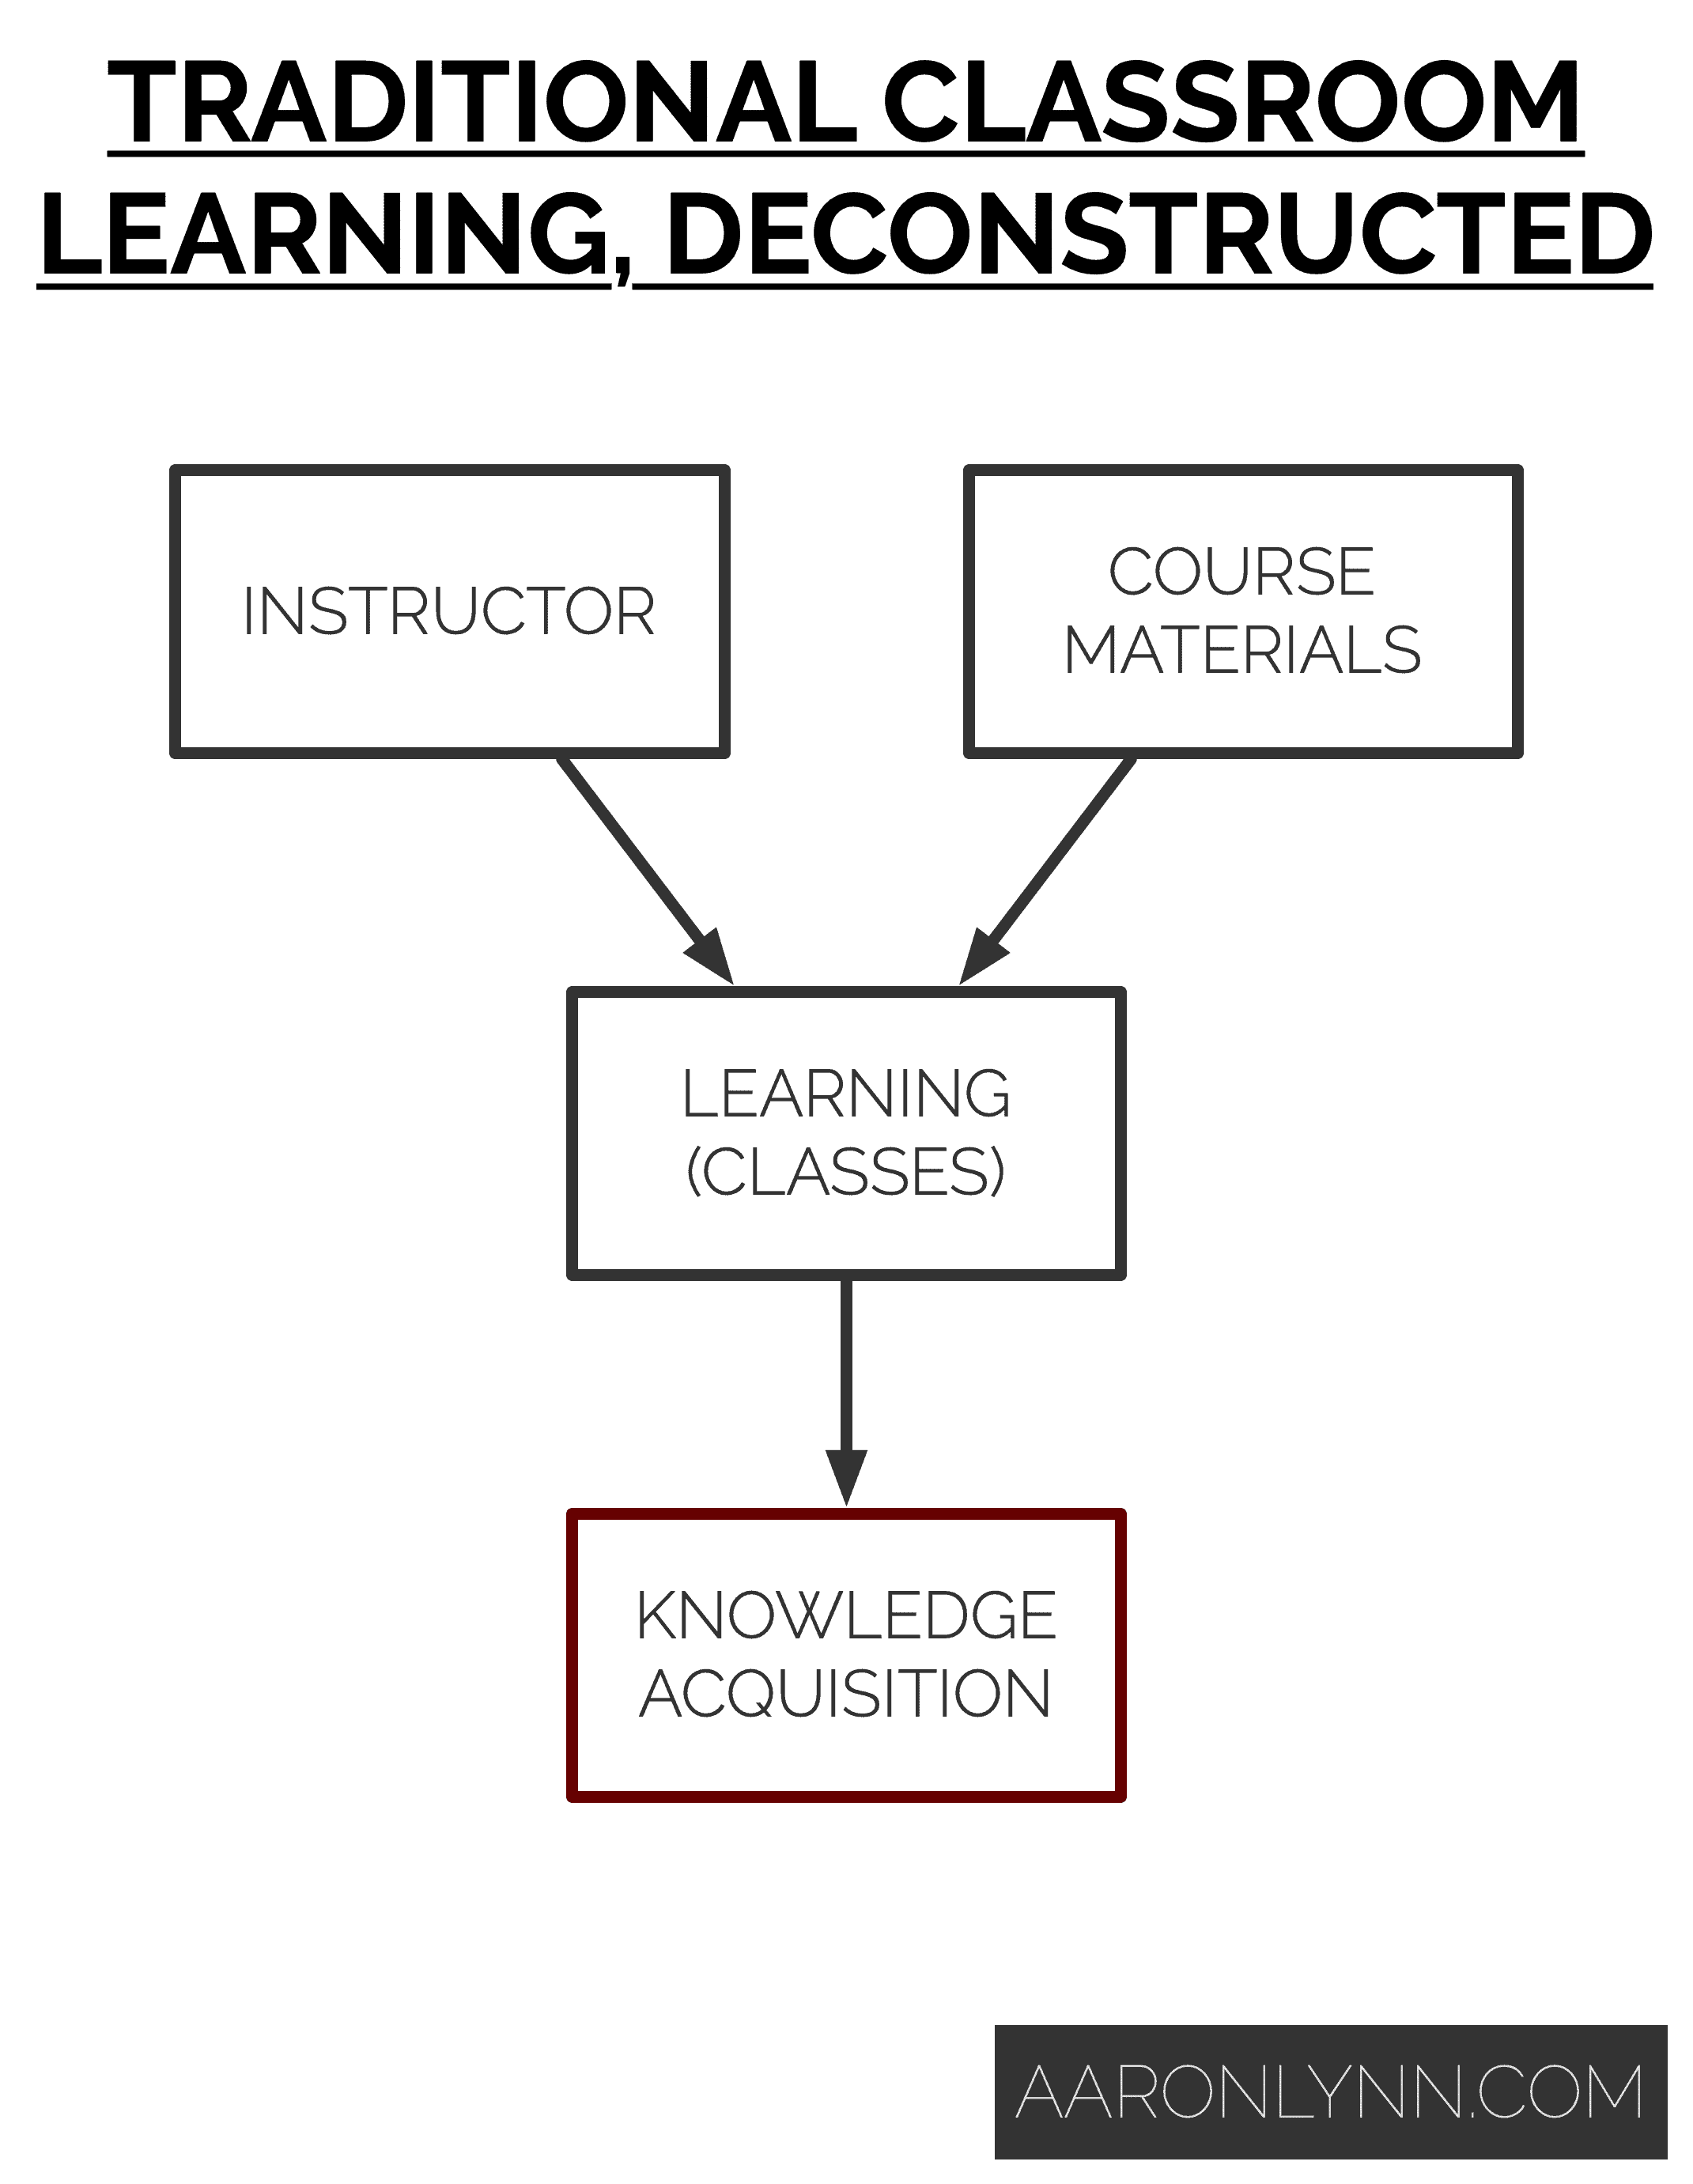 Traditional Classroom Learning, Deconstructed